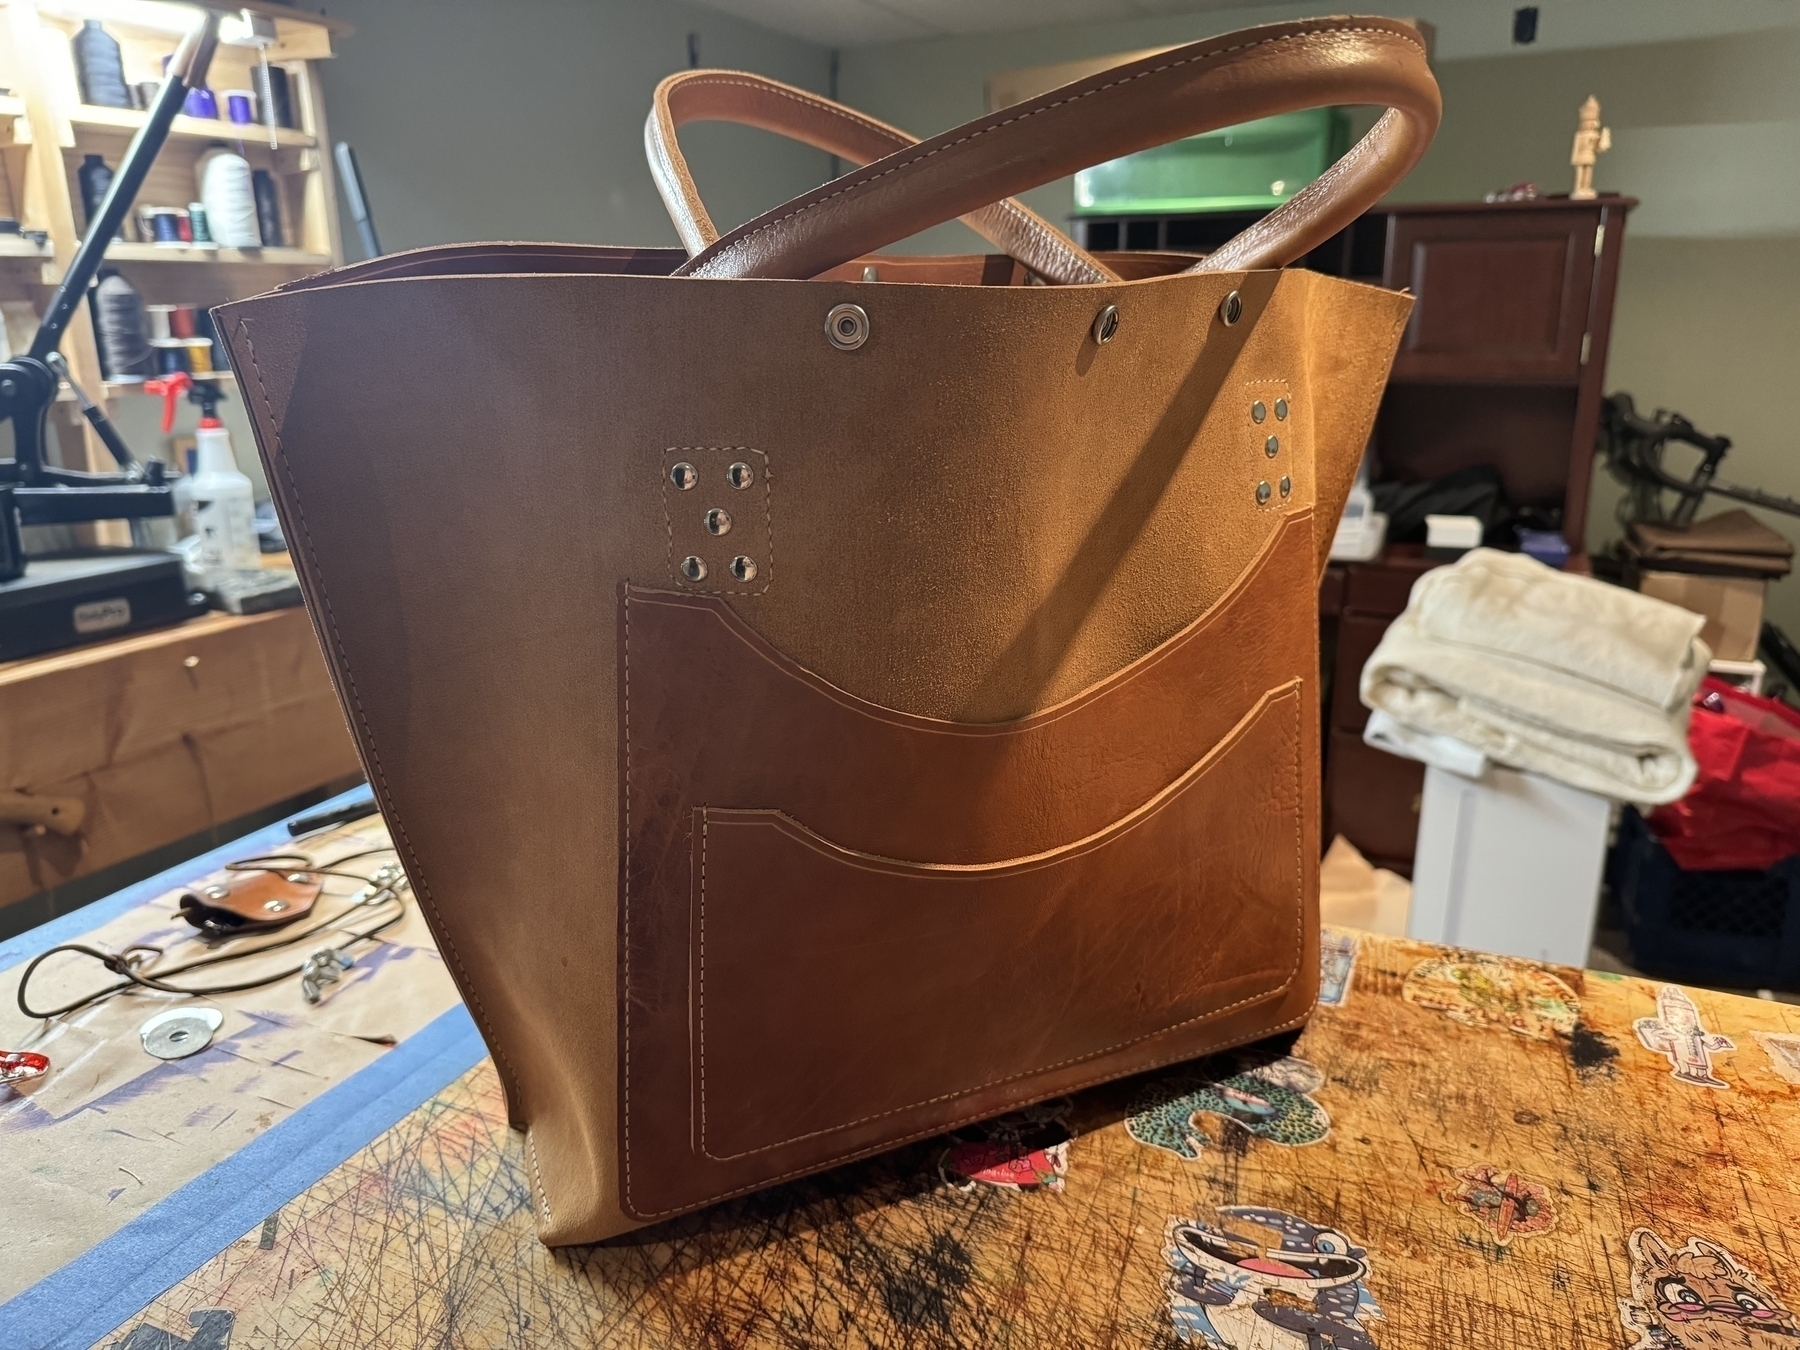 A brown leather handbag with visible stitching and a front pocket is displayed on a cluttered table in what appears to be a workshop.